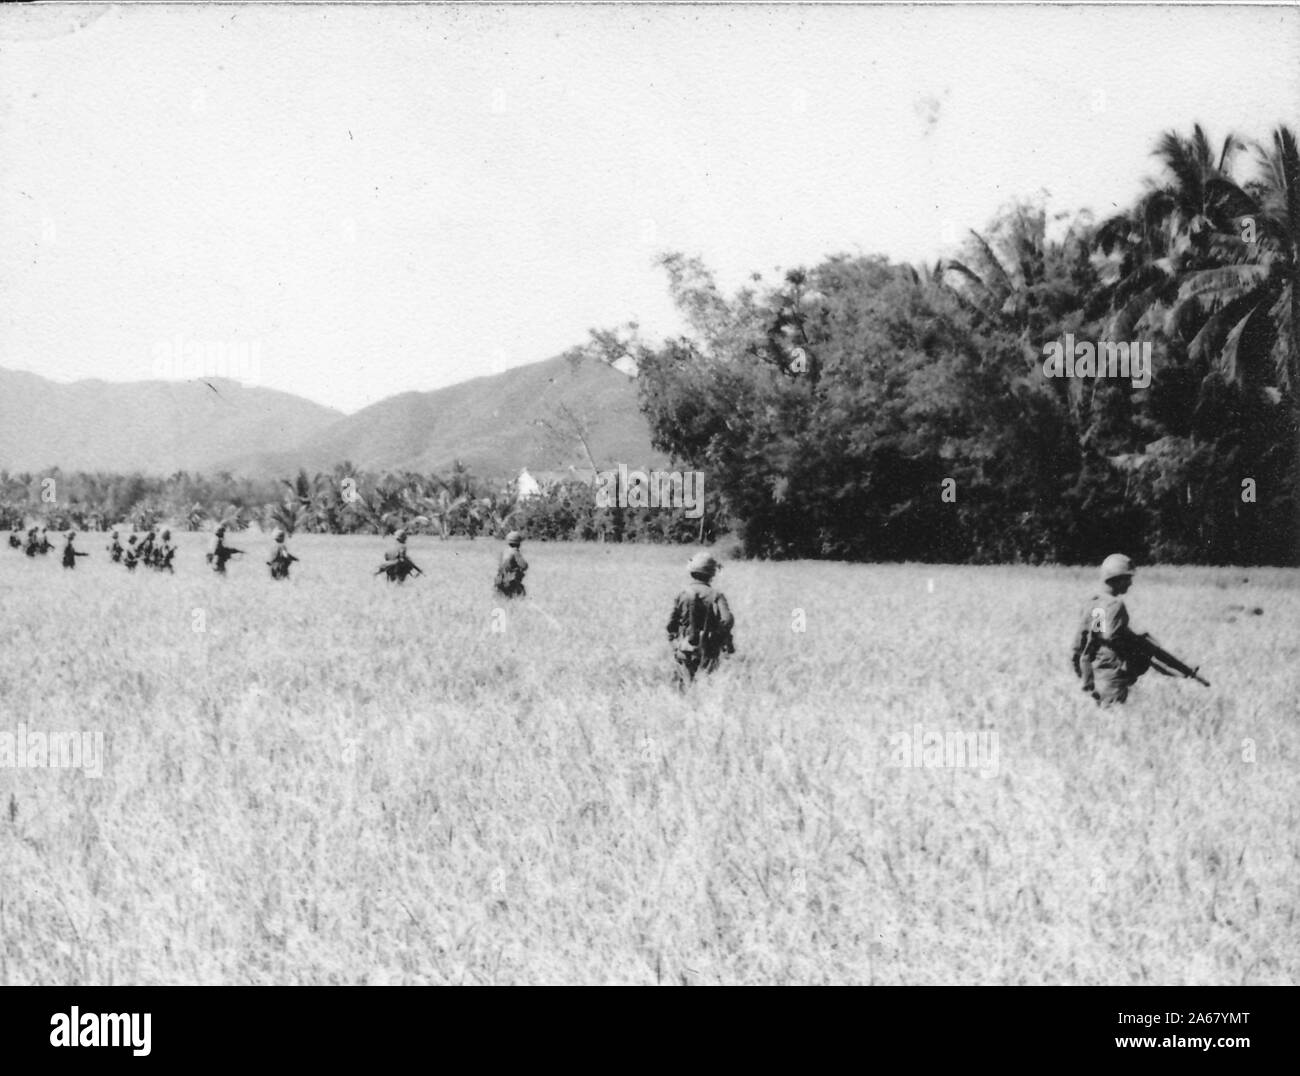 Long shot of armed American servicemen, from the back, advancing through a field with tall grasses or rice plants, toward a forested area, Vietnam, 1965. () Stock Photo